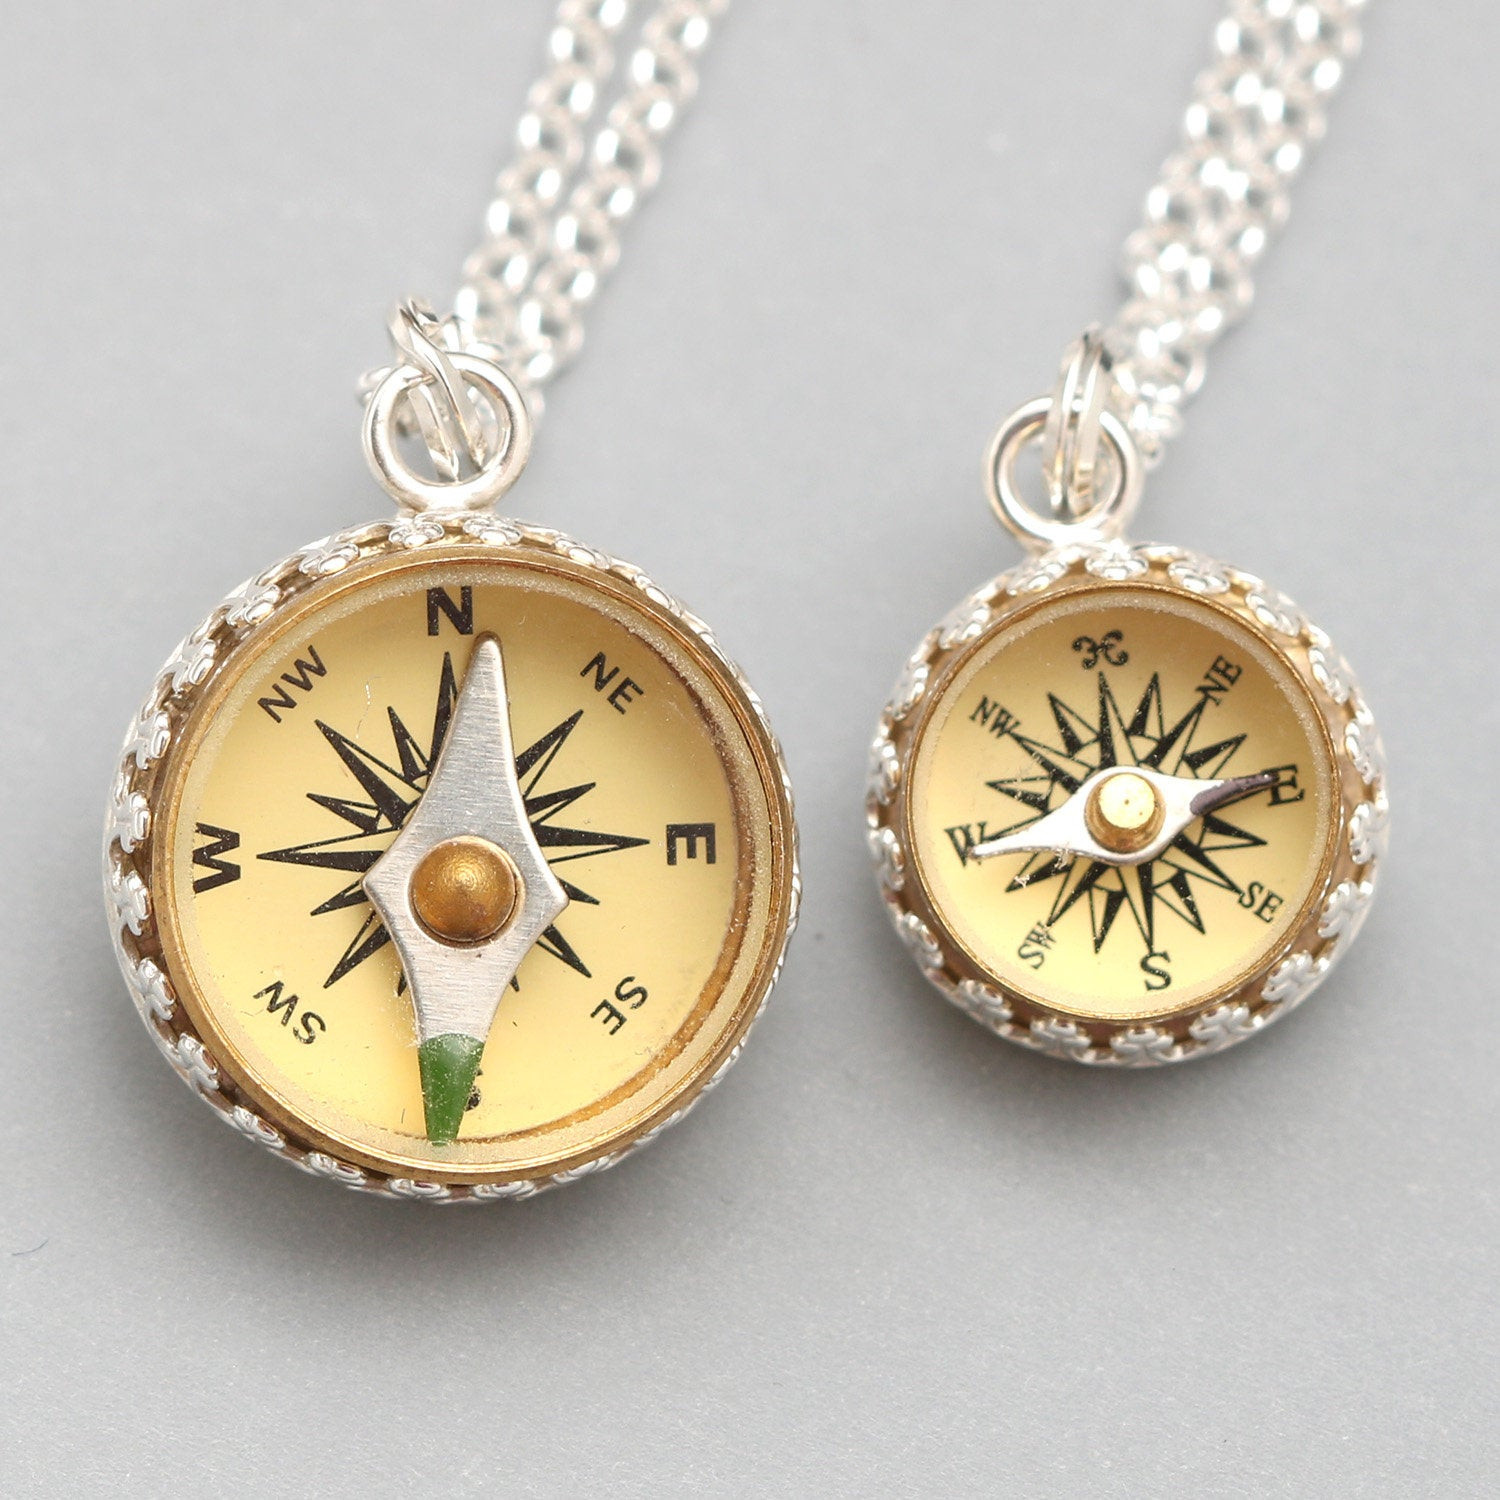 Working Compass Necklace
 Working pass Necklace Sterling Silver pass Pendant